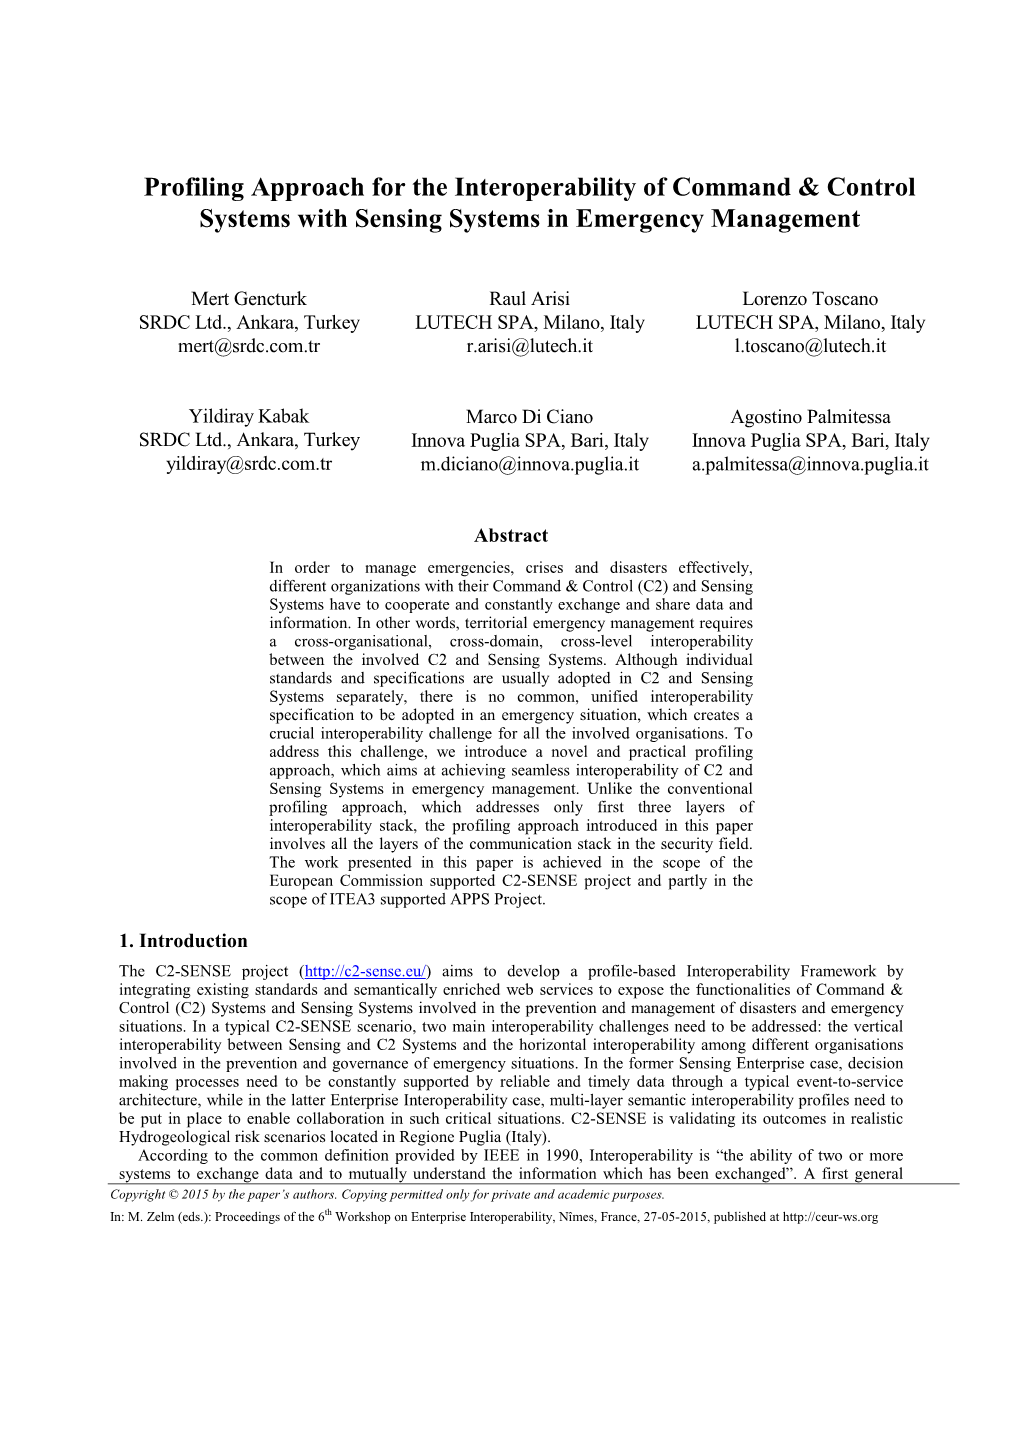 Profiling Approach for the Interoperability of Command & Control Systems with Sensing Systems in Emergency Management